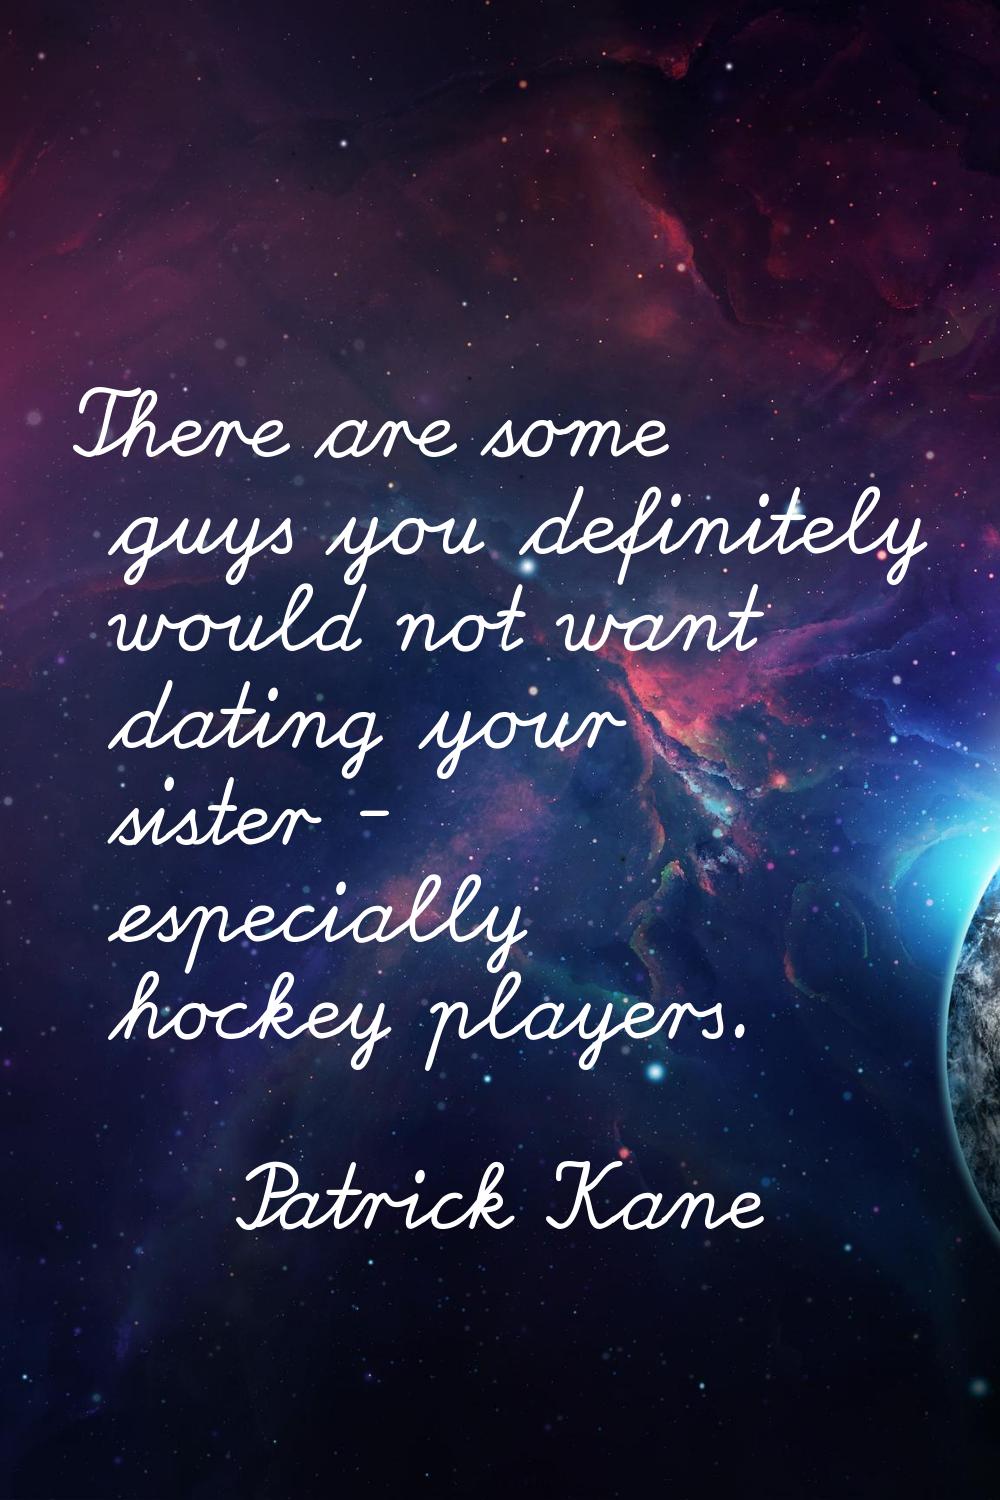 There are some guys you definitely would not want dating your sister - especially hockey players.